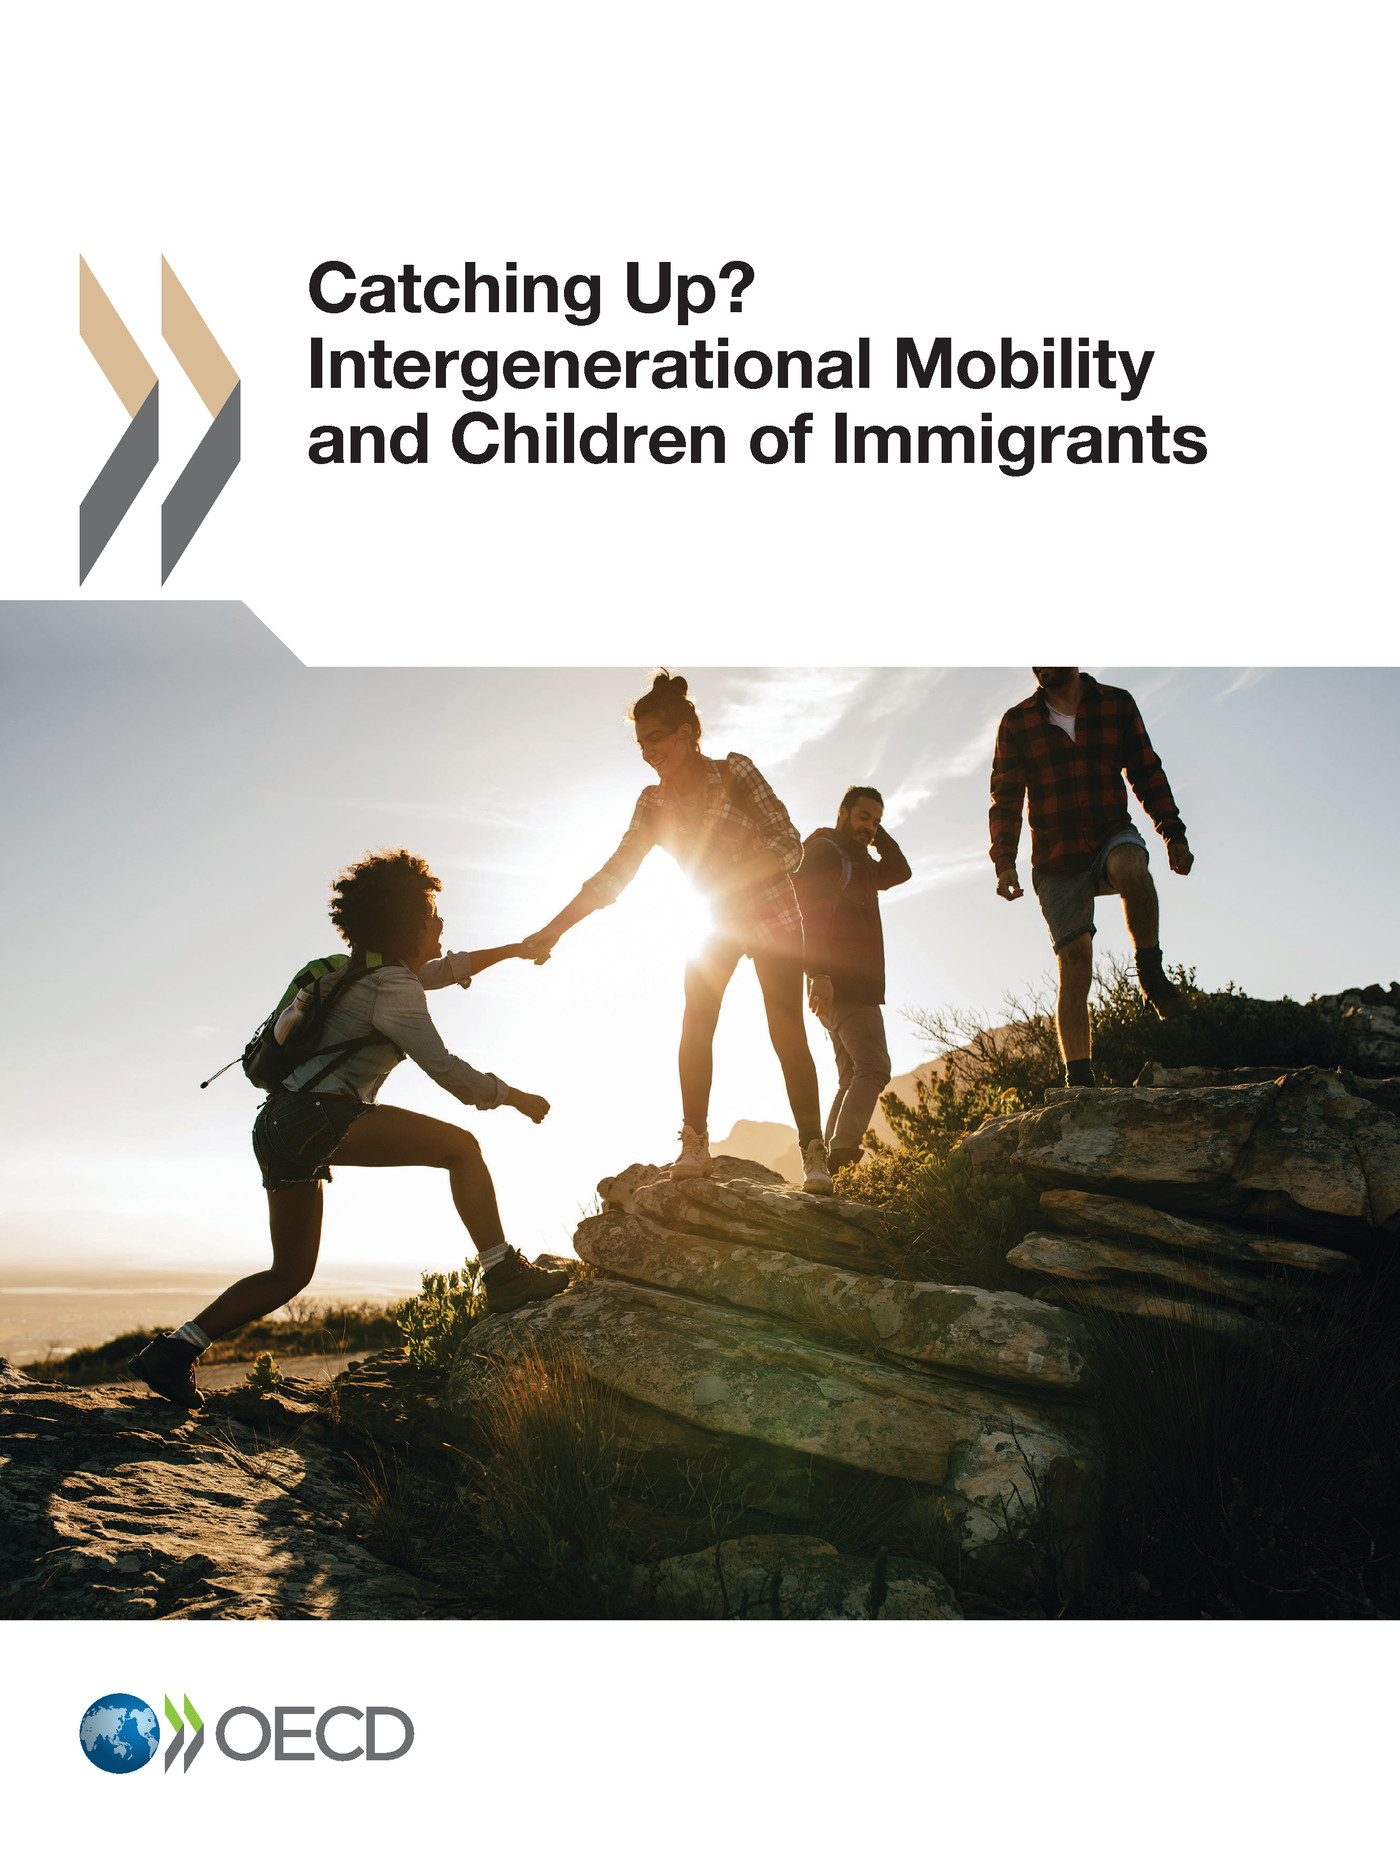 Catching Up? Intergenerational Mobility and Children of Immigrants -  Collectif - OCDE / OECD